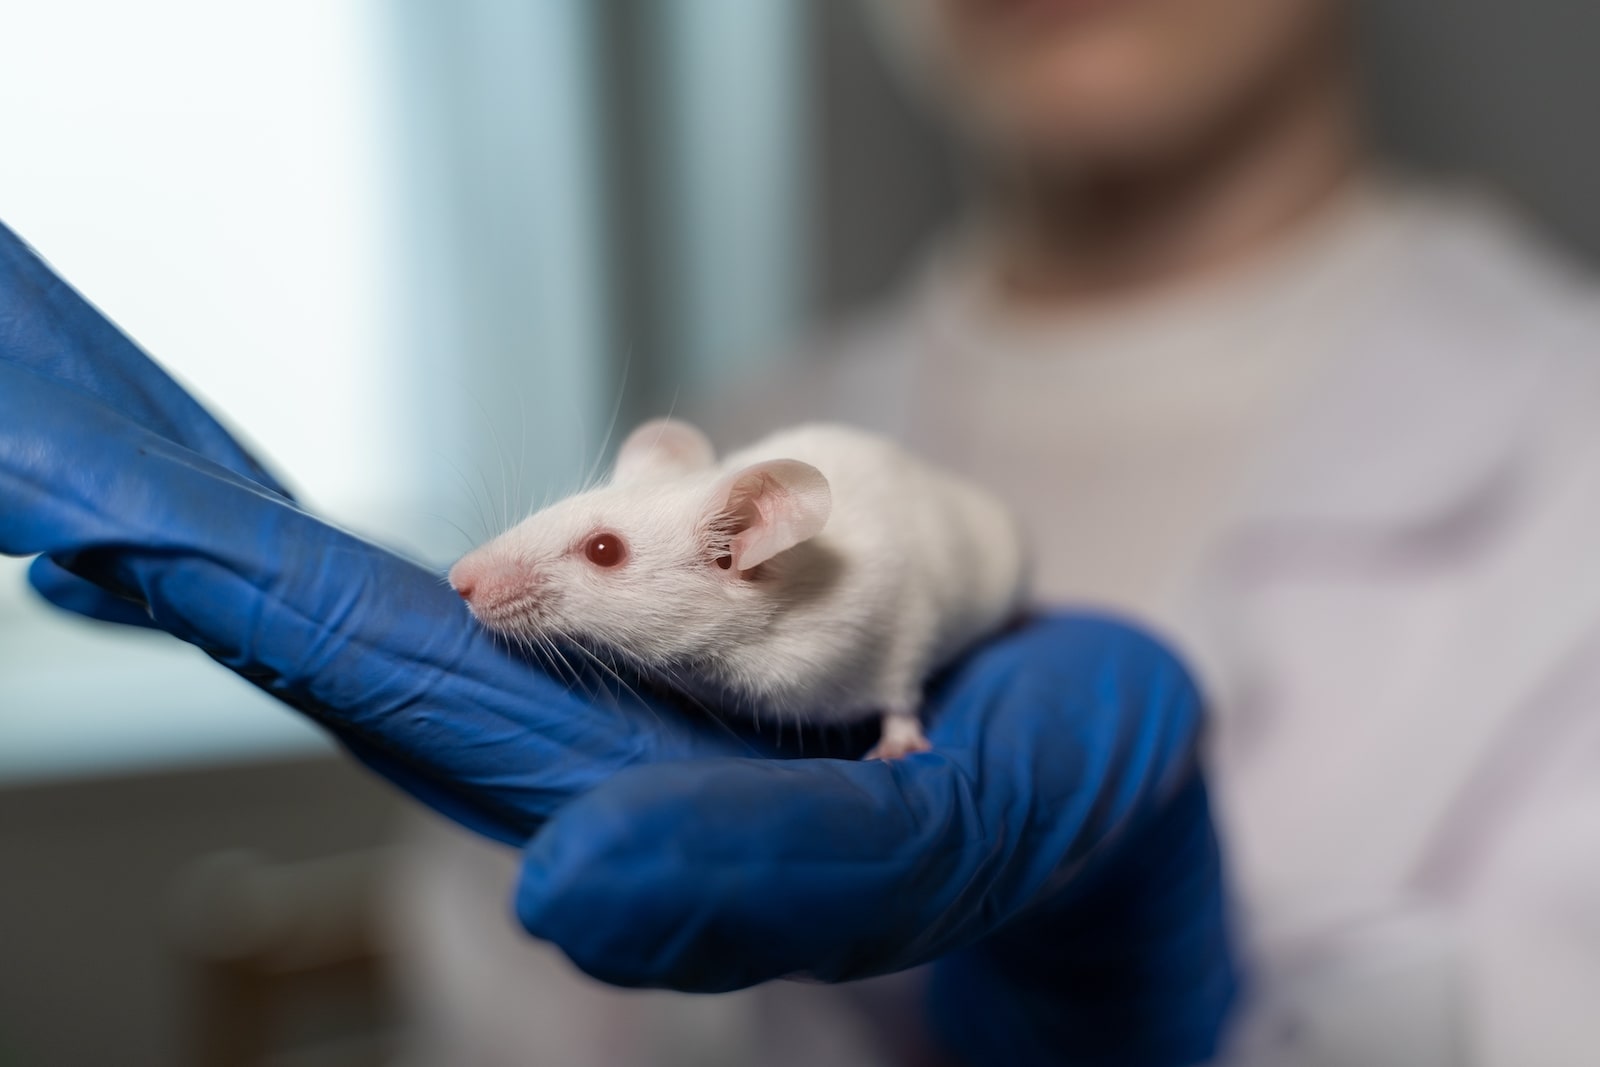 A white mouse with red eyes sits in a hand in a blue rubber glove. A laboratory assistant in a white coat is seen from behind.